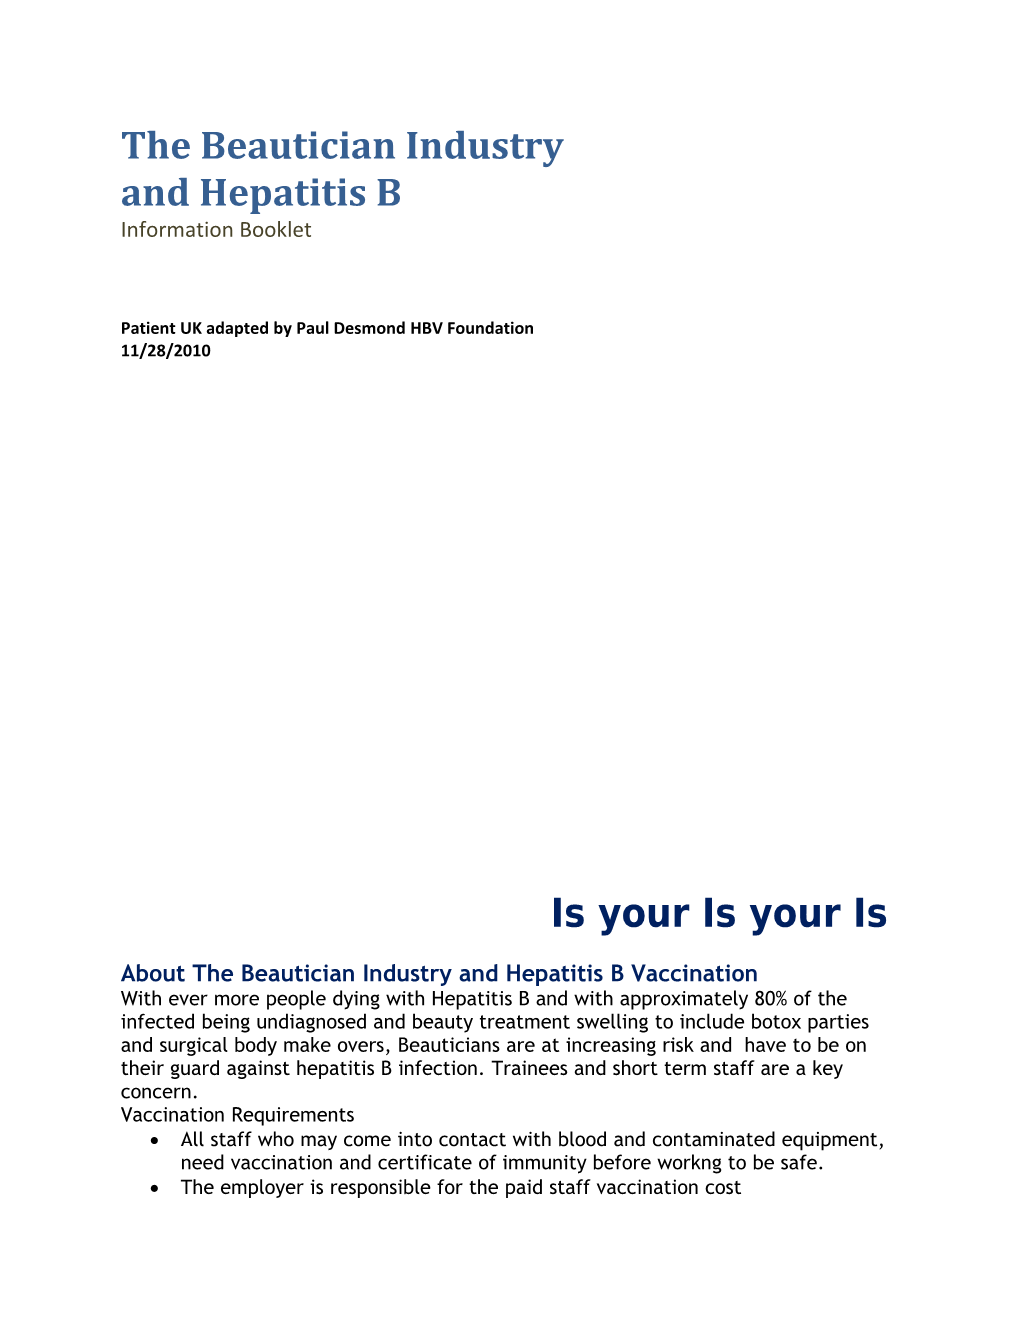 The Beautician Industry and Hepatitis B